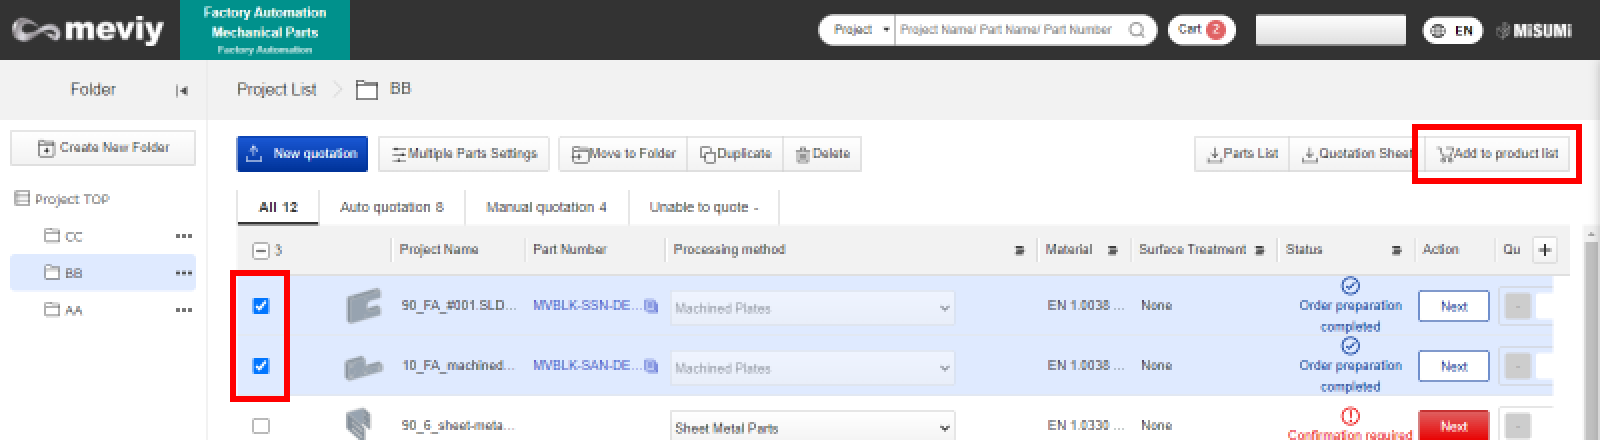 Return to the project list, select the parts you want to order, and click "Add to project list"